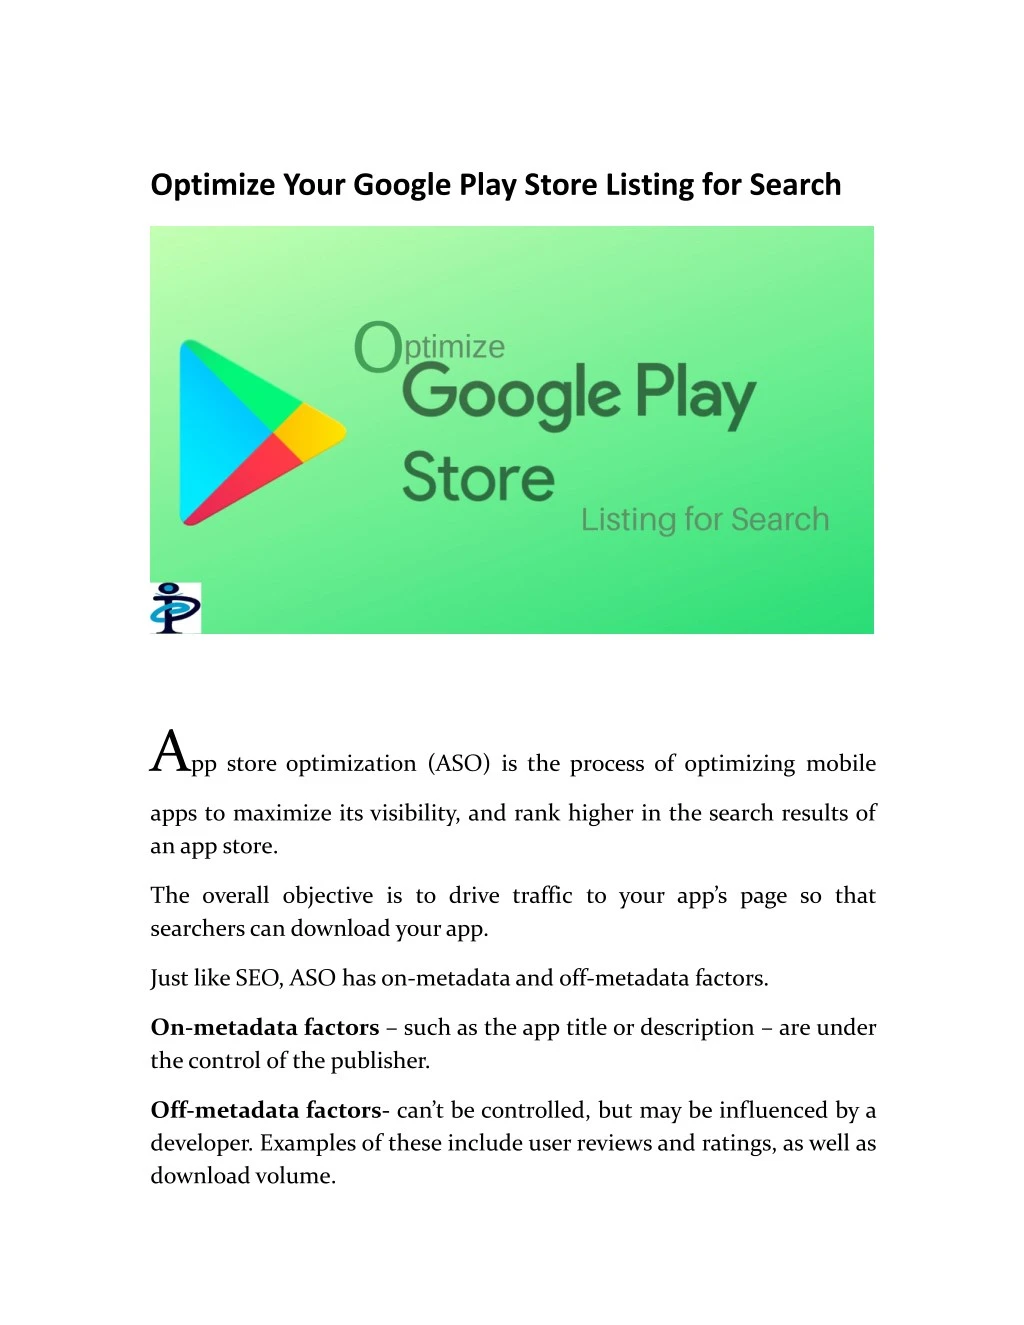 optimize your google play store listing for search